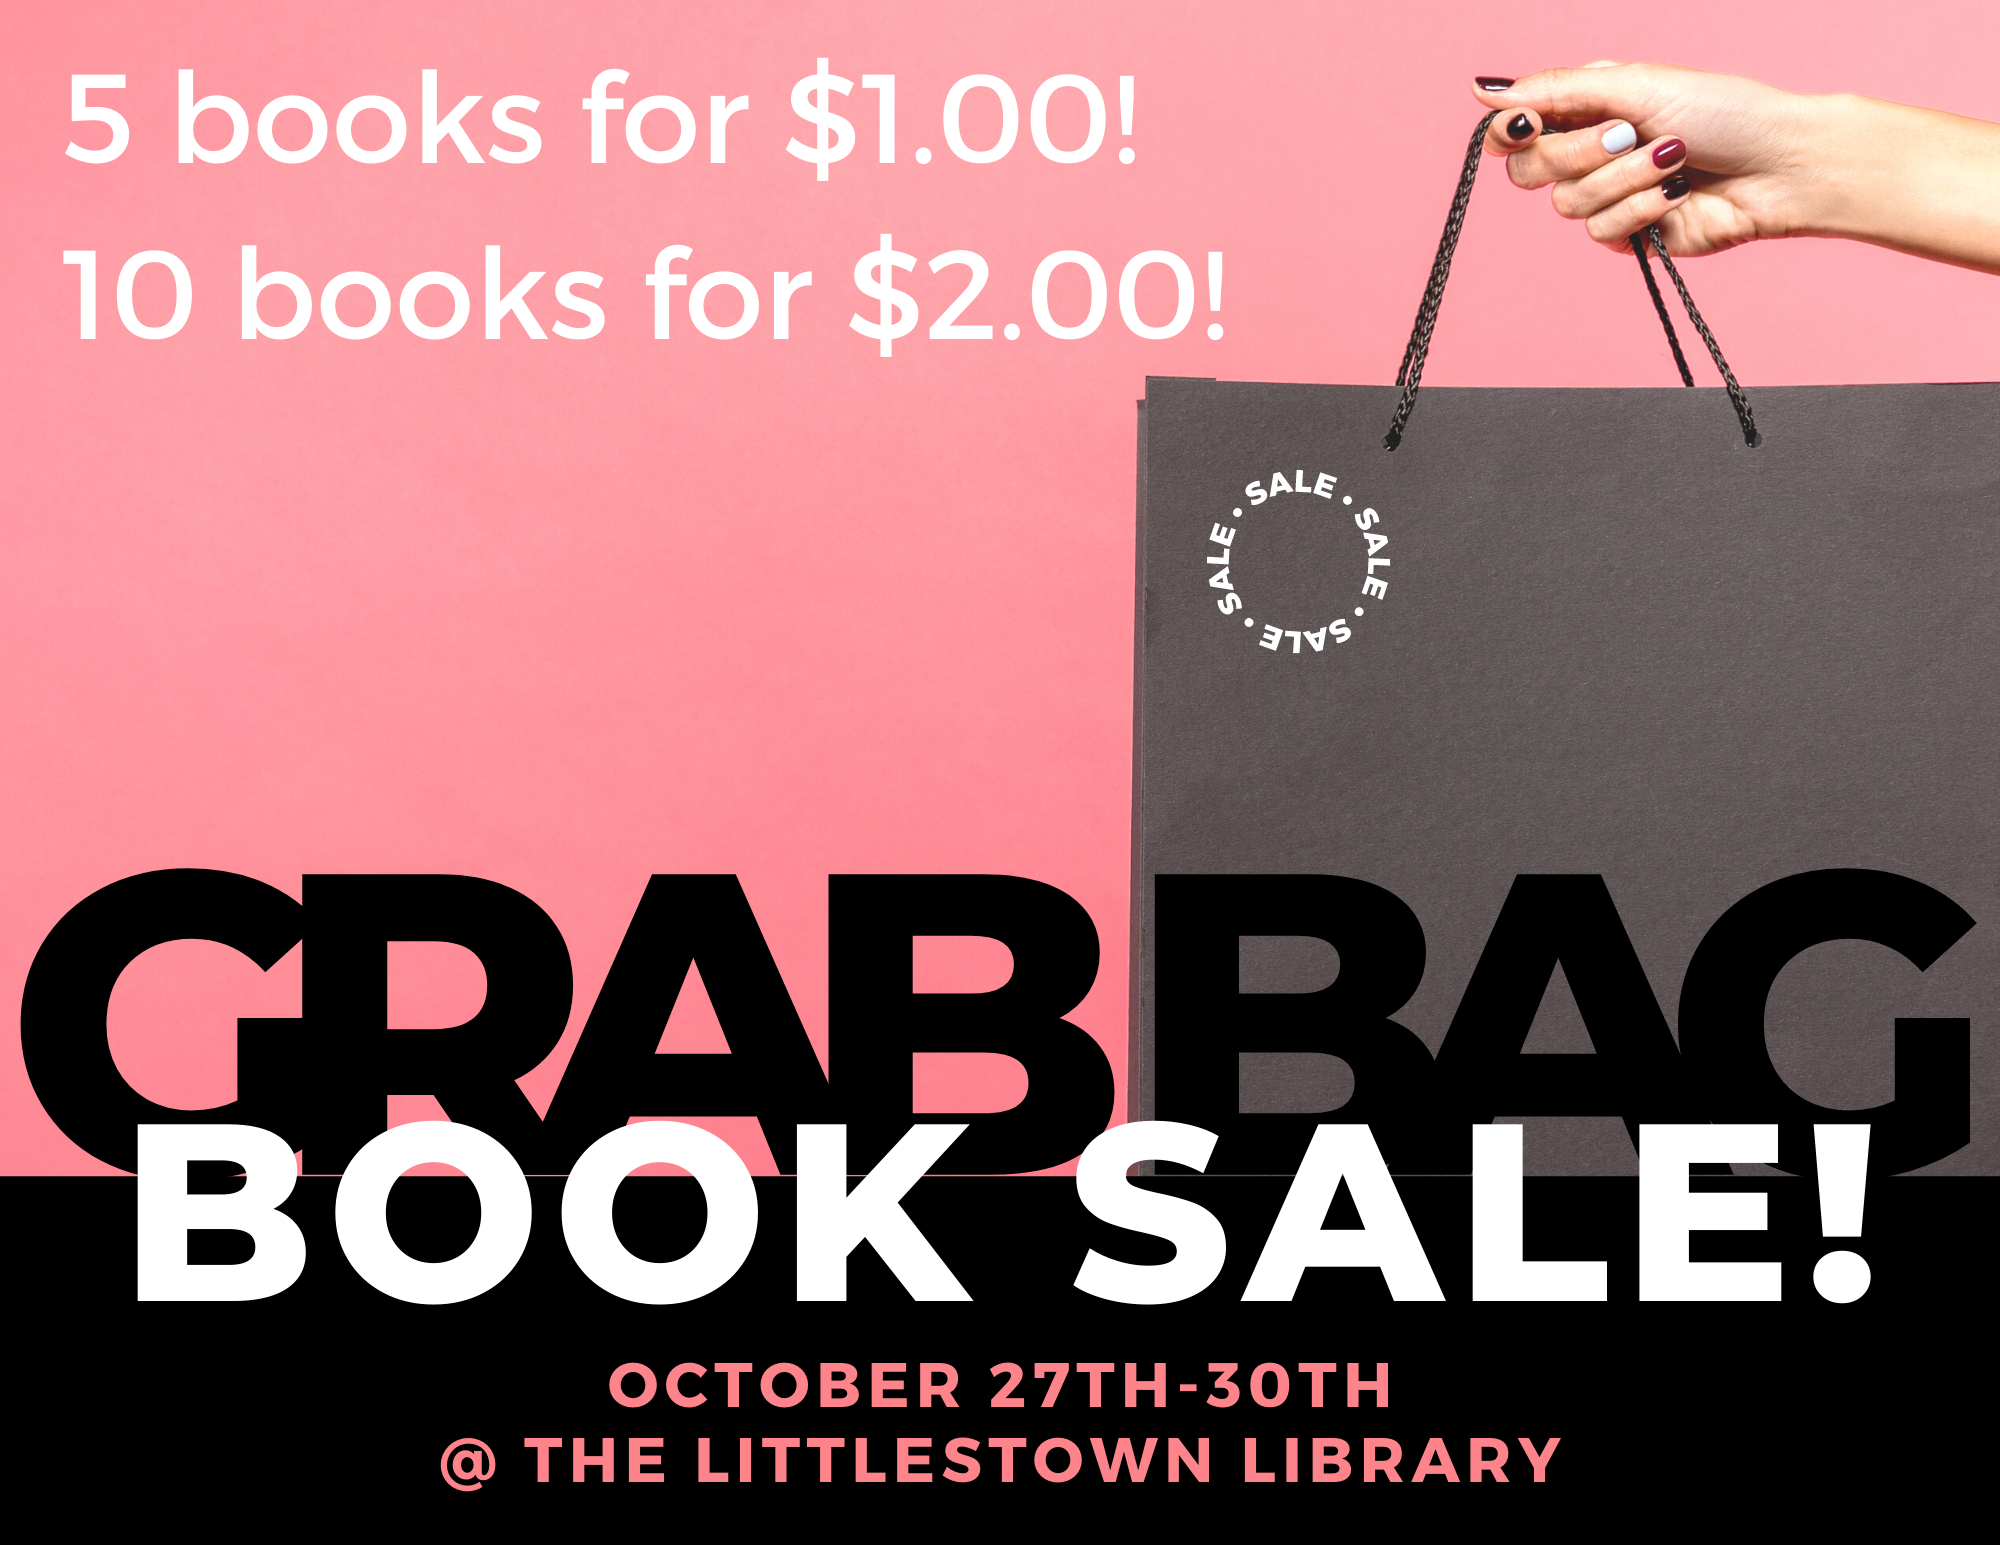 Grab Bag Book Sale October 27 through October 30 at the Littlestown Library. 5 books for 1$ and 10 books for $2!